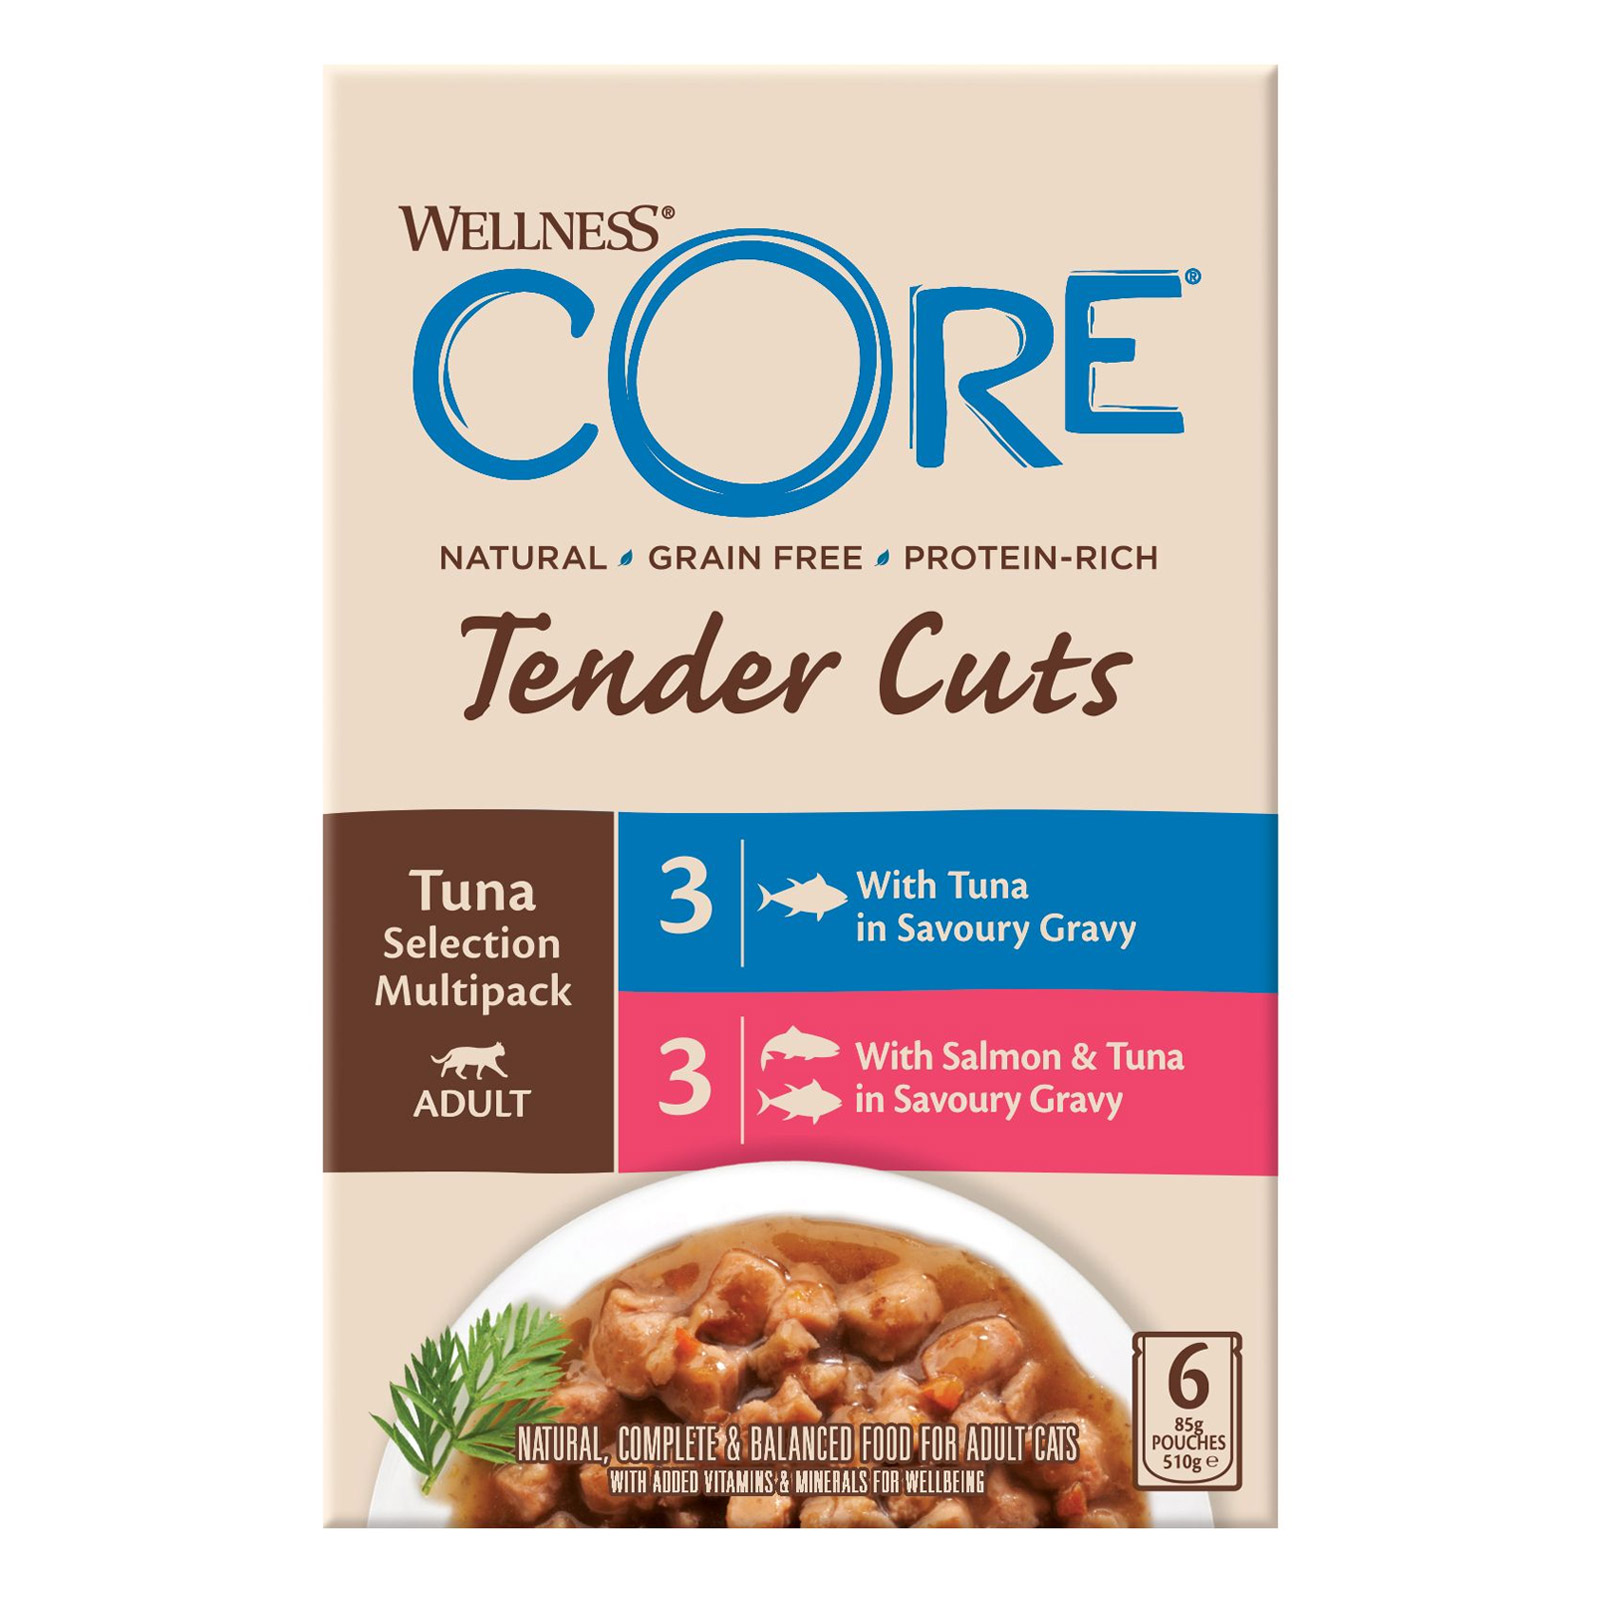 Wellness CORE Tender Cuts Tuna Selection Multipack for Food